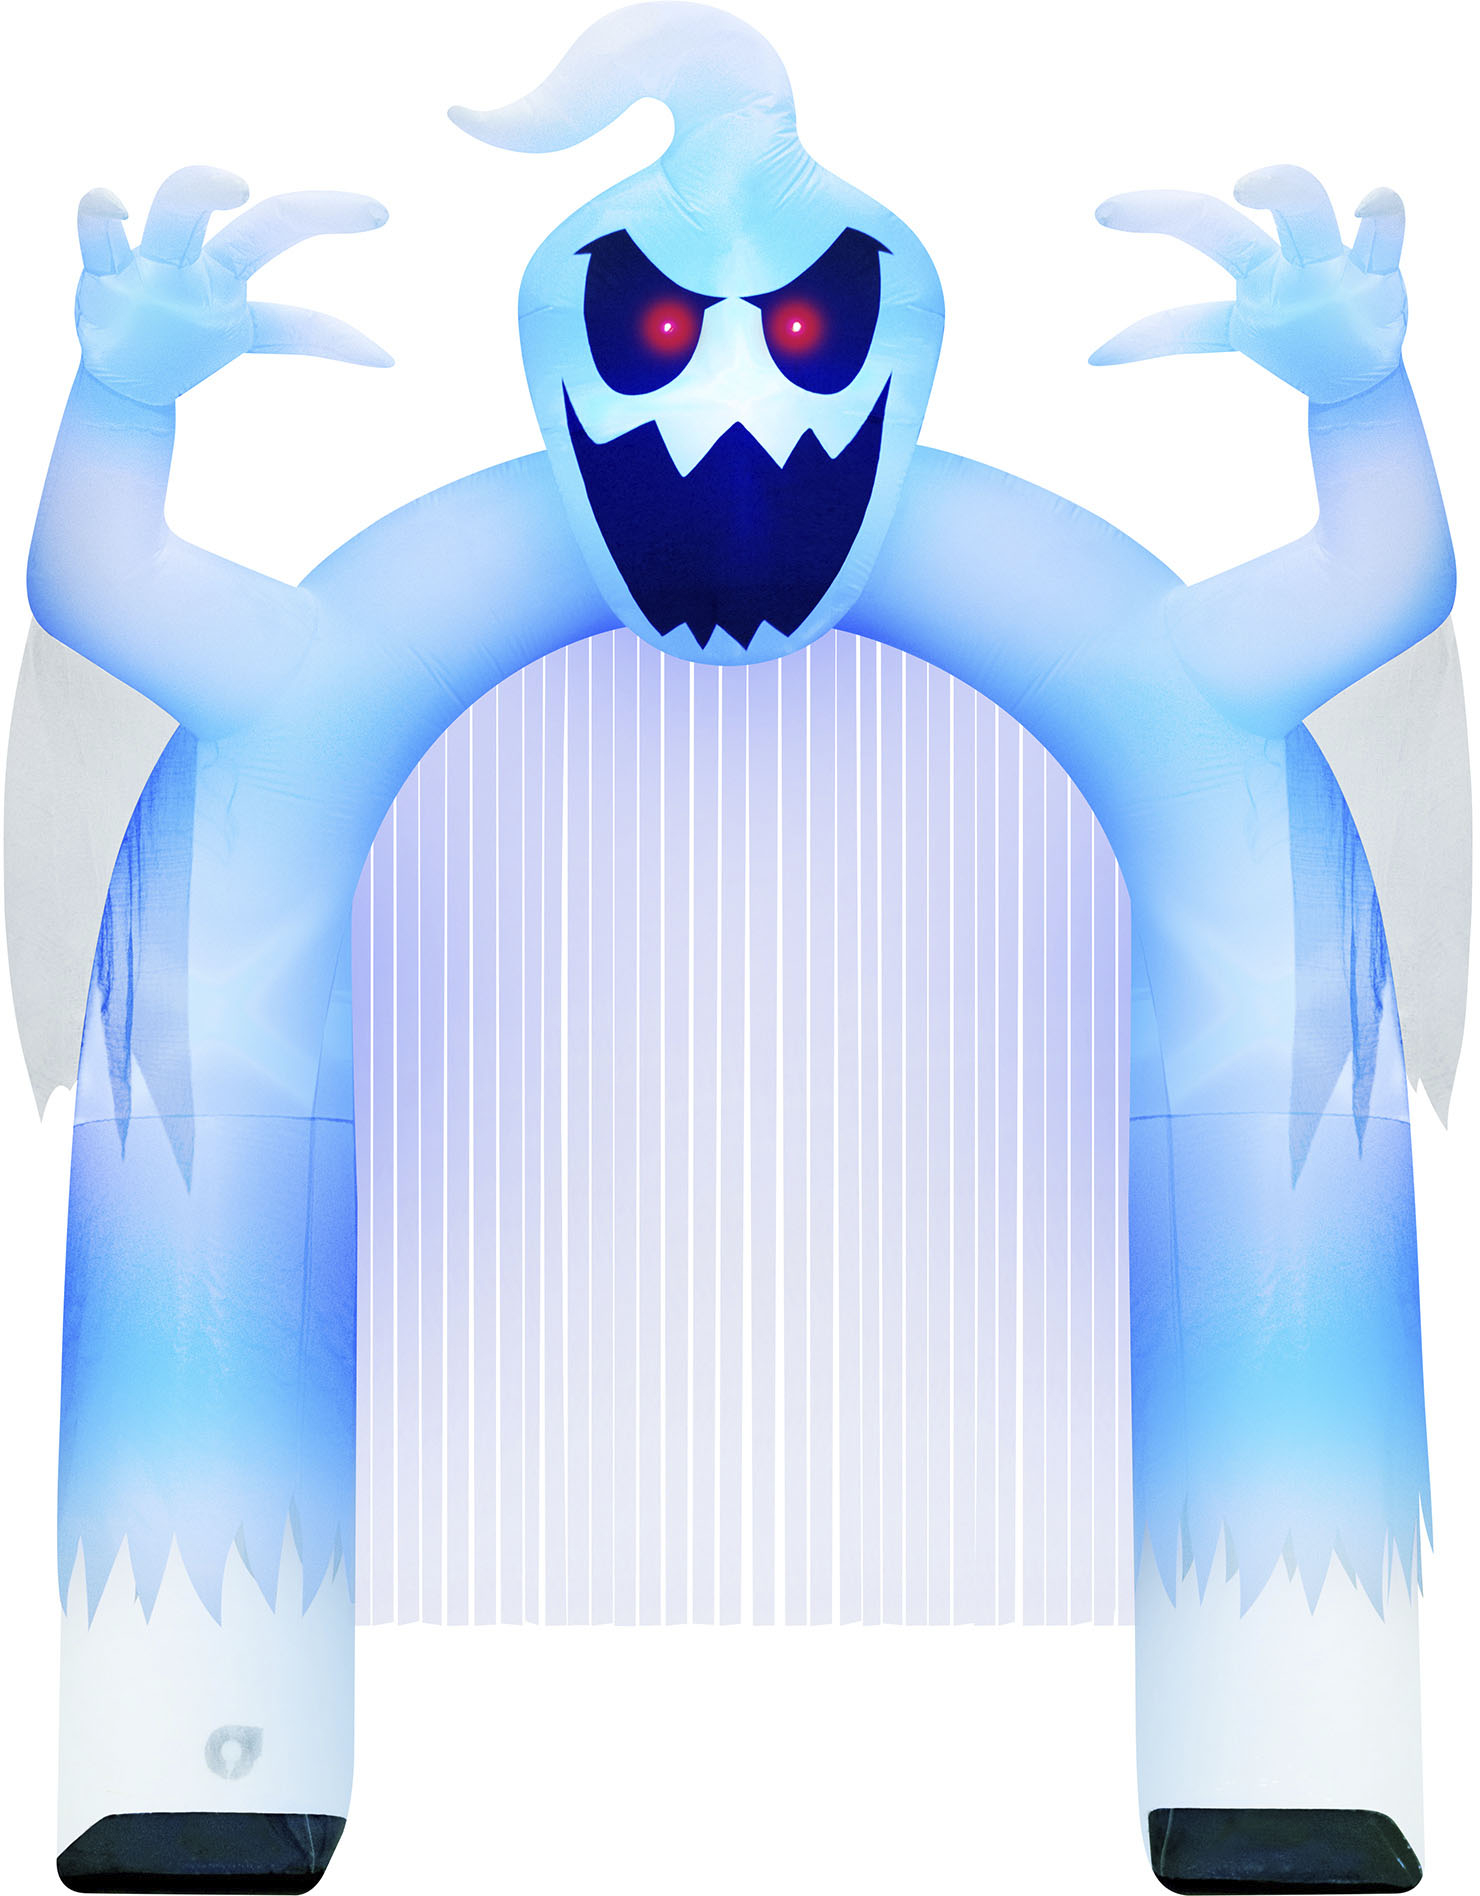 Occasions 12' Tall Inflatable Ghost Archway